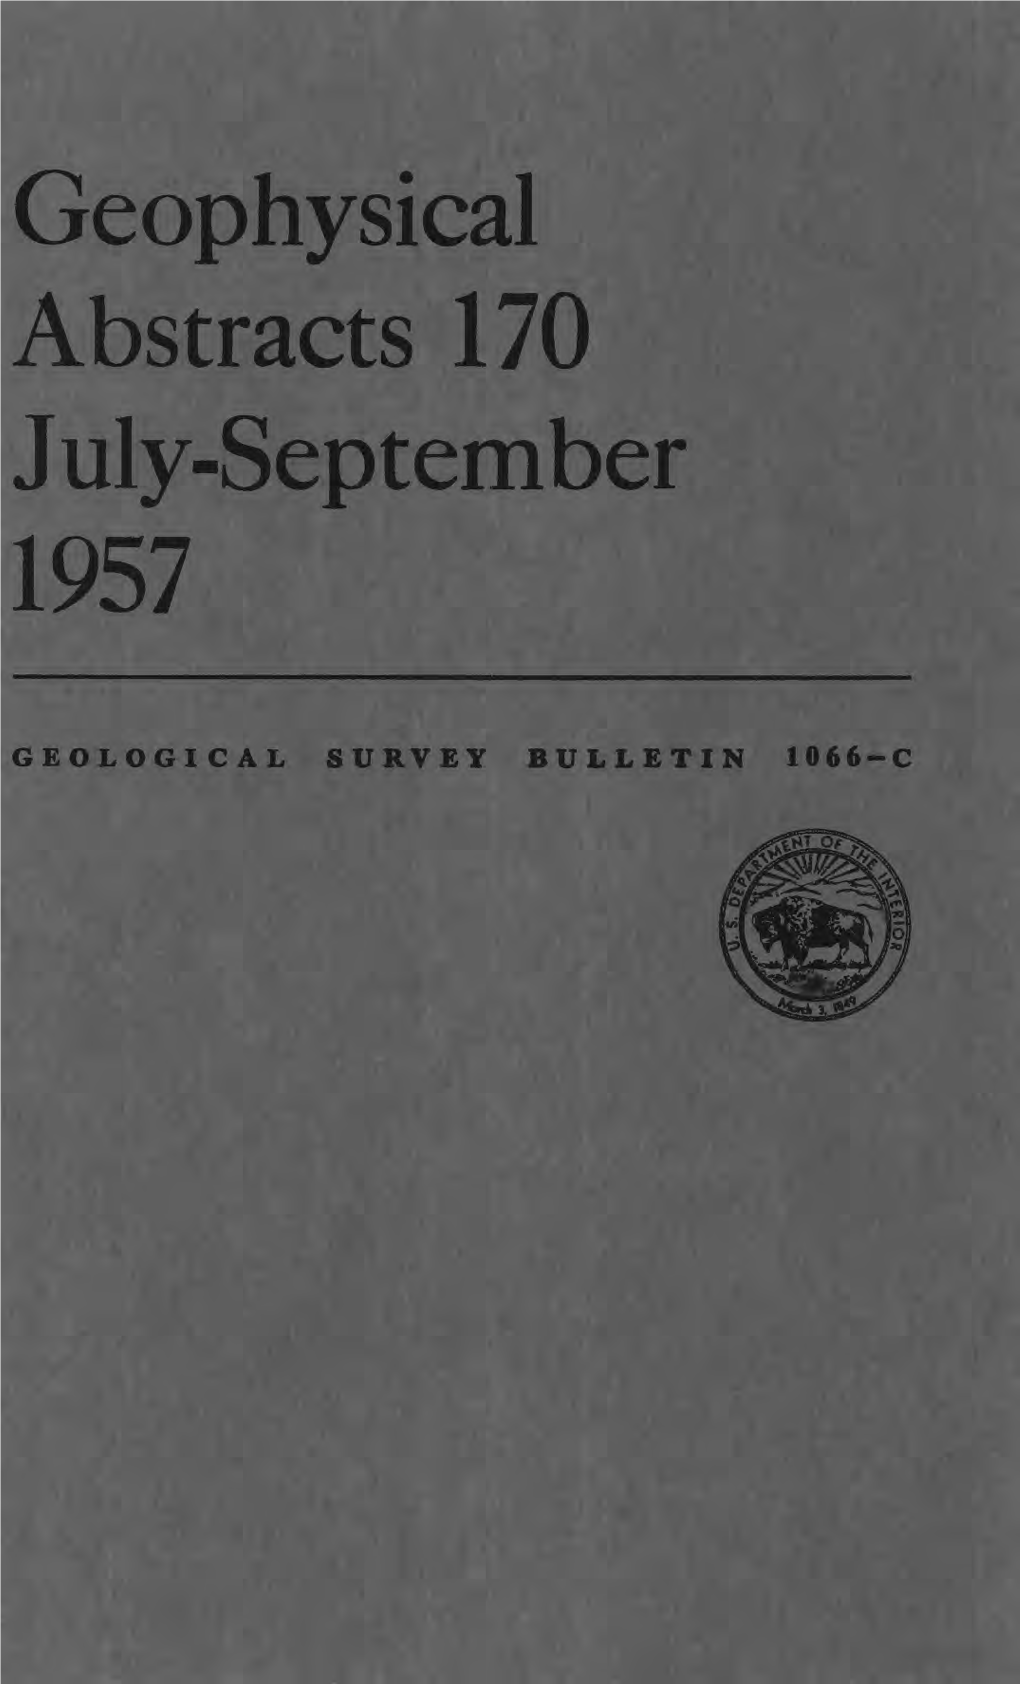 Geophysical Abstracts 170 July-September 1957